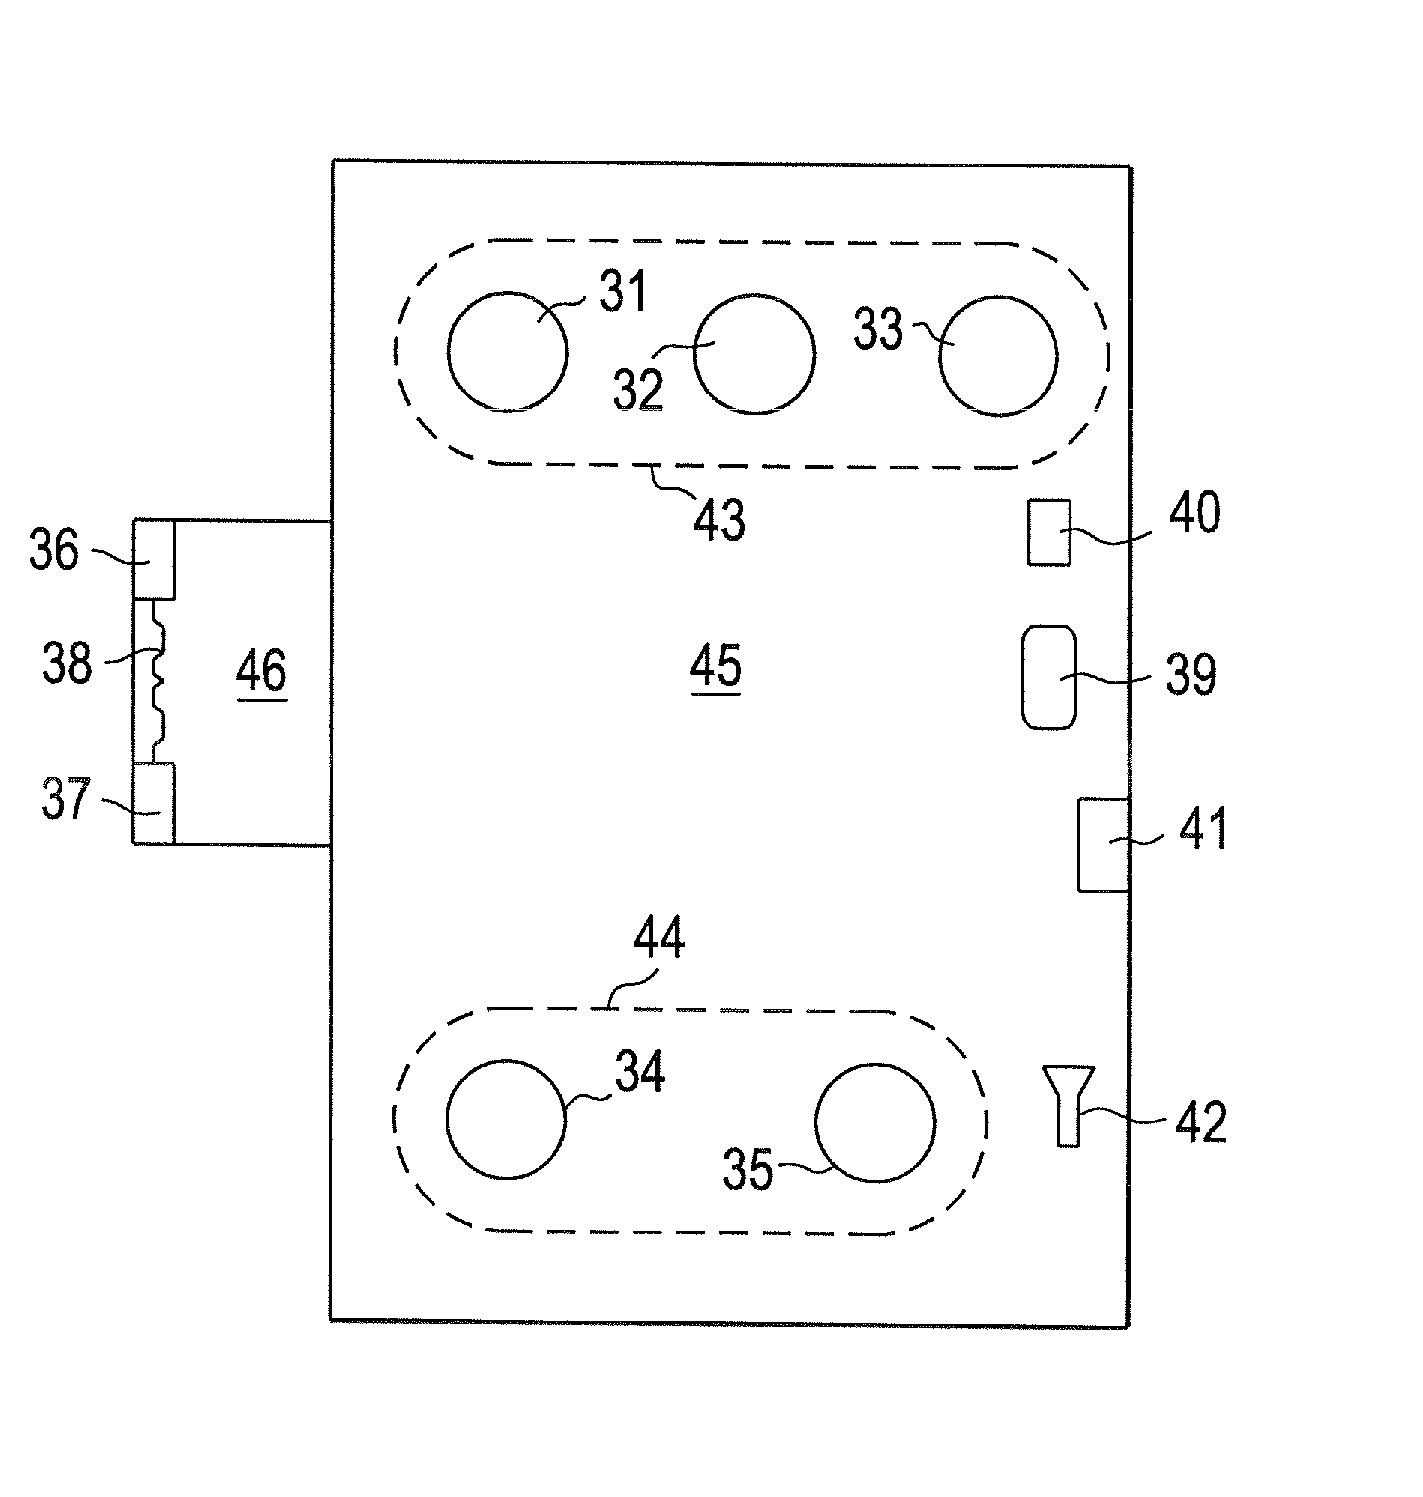 Light fixtures, systems for controlling light fixtures, and methods of controlling fixtures and methods of controlling lighting control systems